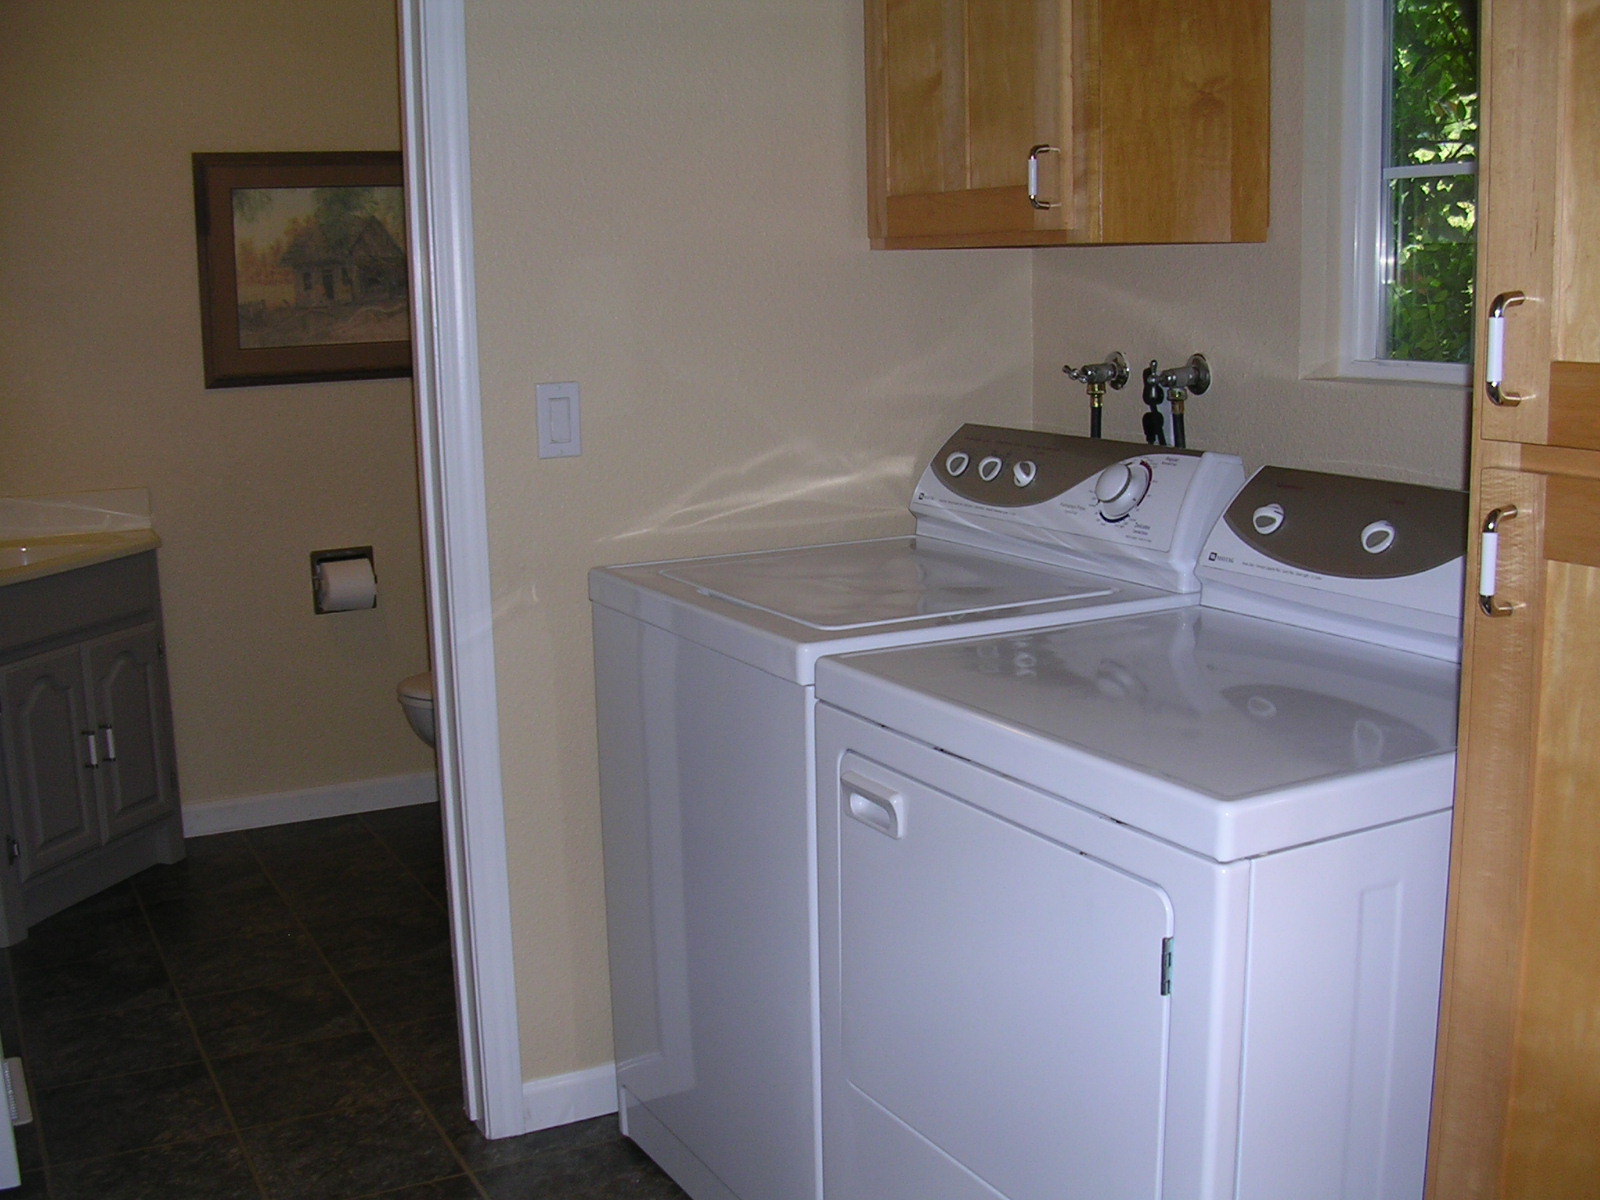 Upstairs laundry room with half bath located off kitchen.